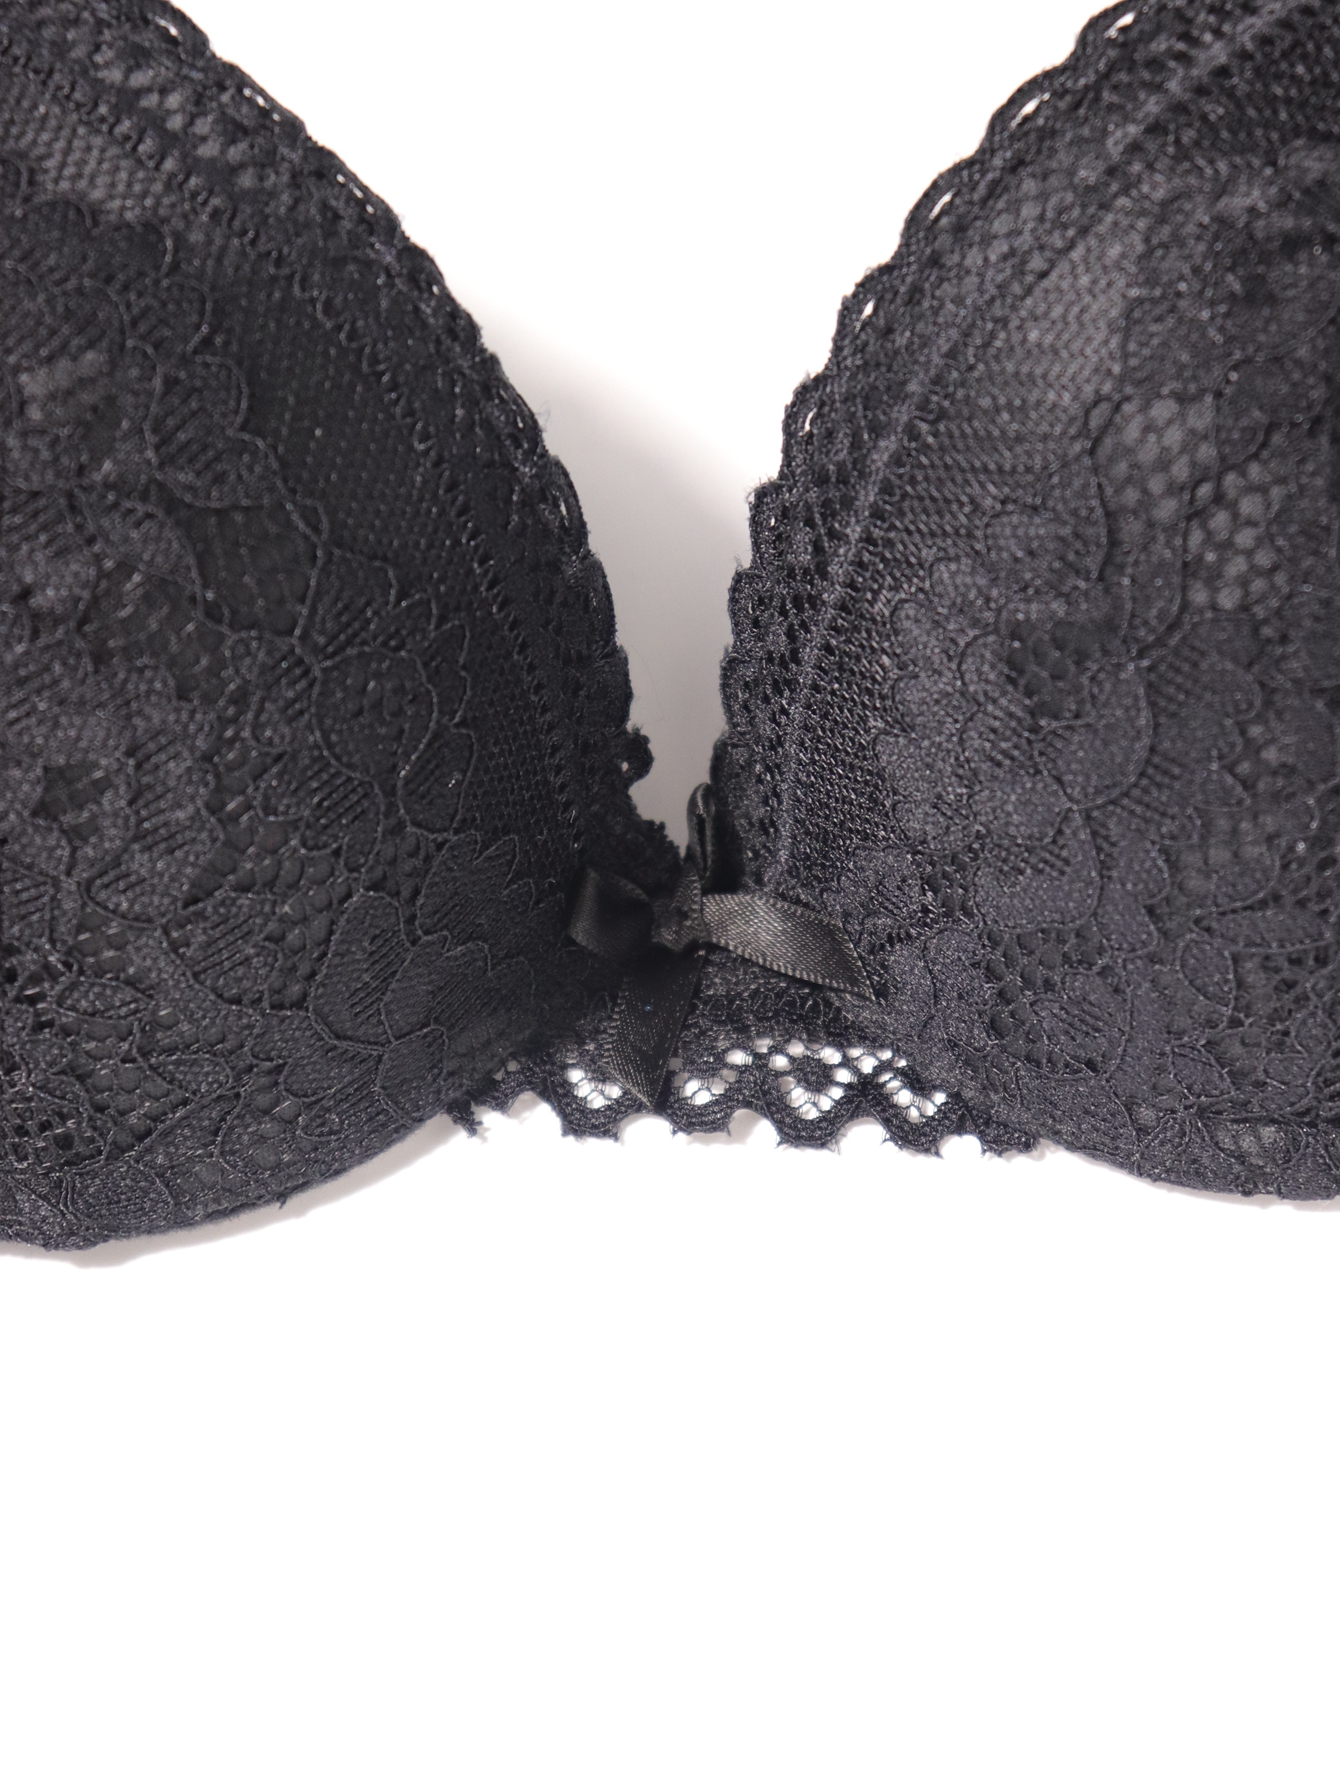 Buy FEATHERLINE Lace Design Seamless Padded Women's T-Shirt Bras with  Transparent Straps (Black, 30B) at